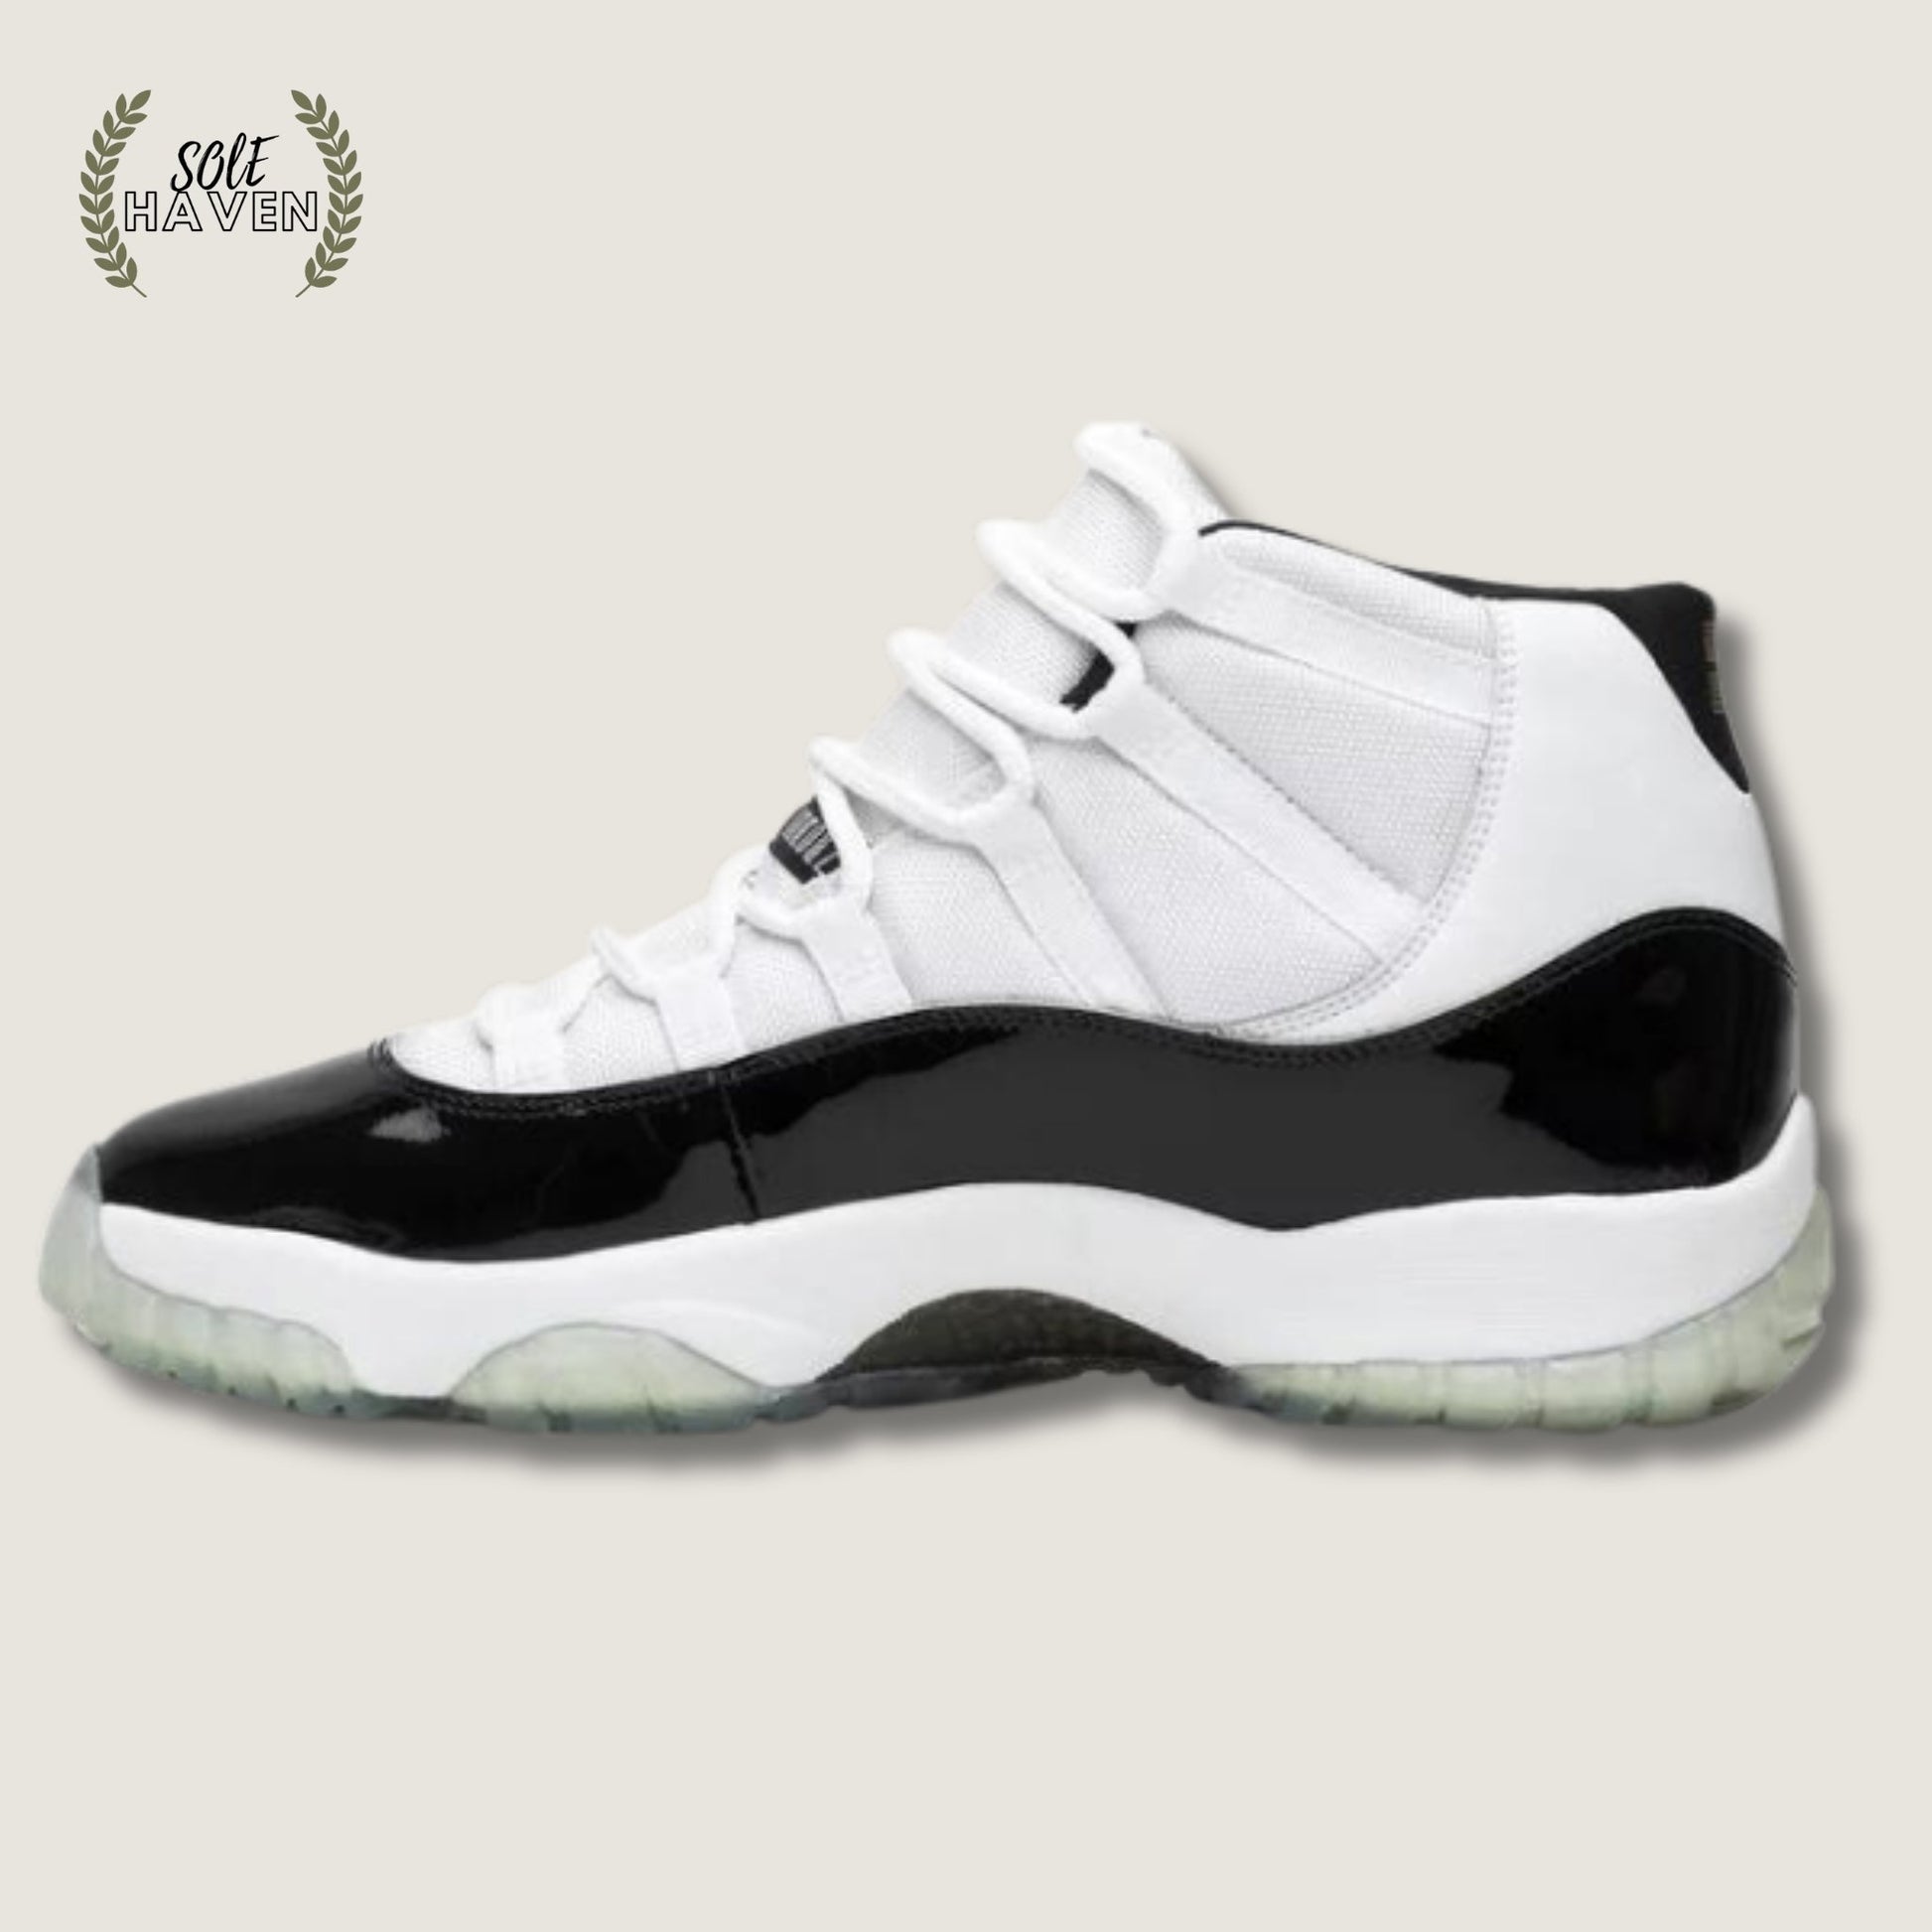 Air Jordan 11 Retro 'Concord - Defining Moments Pack' - Sole HavenShoesNike